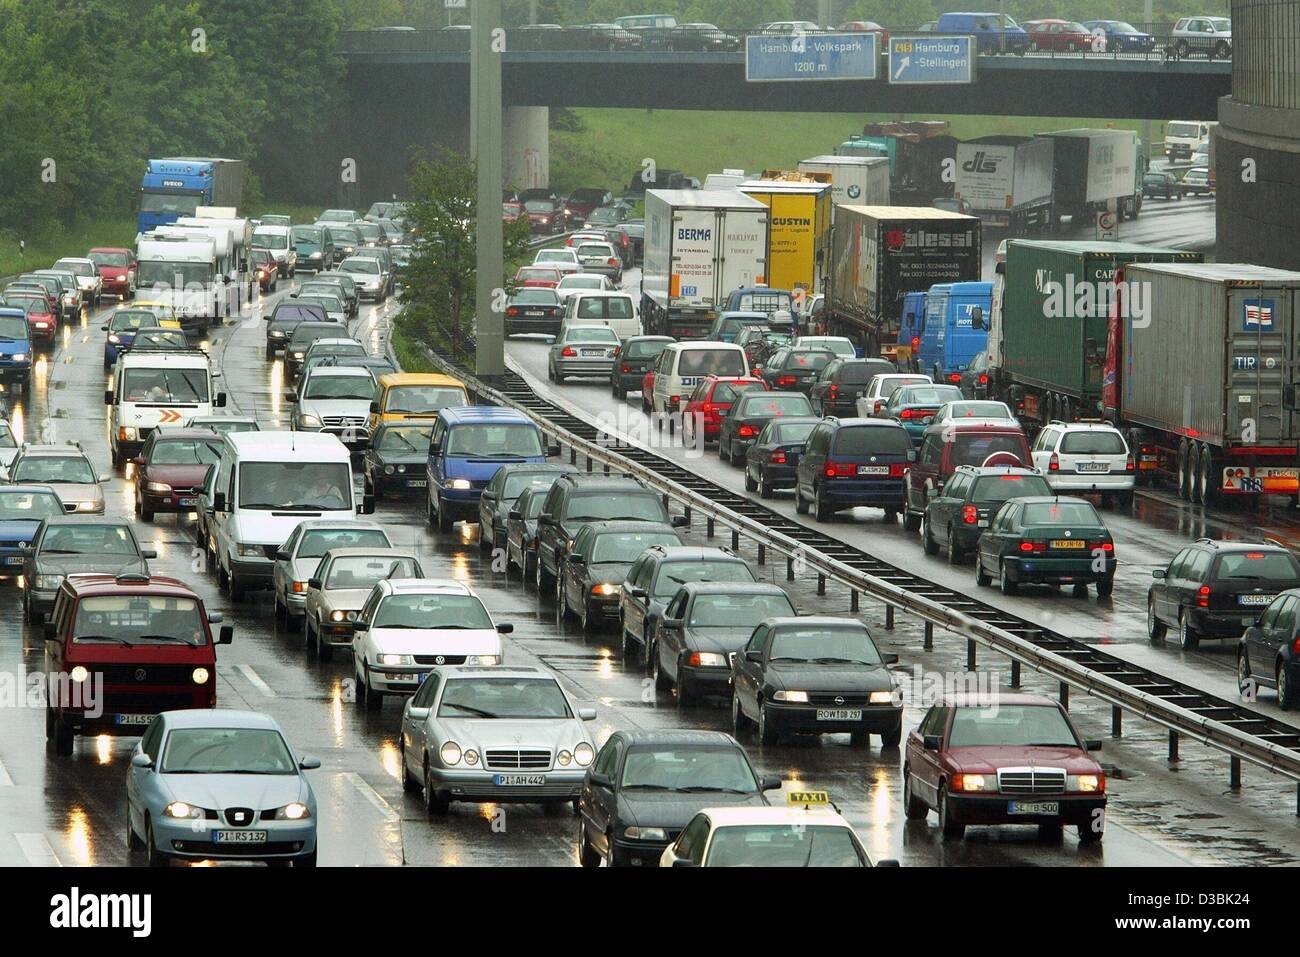 (dpa) - Cars and trucks are stuck in a traffic jam on the A7 motorway in Hamburg, 23 May 2003. Especially on weekends this part of the motorway is often affected by traffic jams. Stock Photo